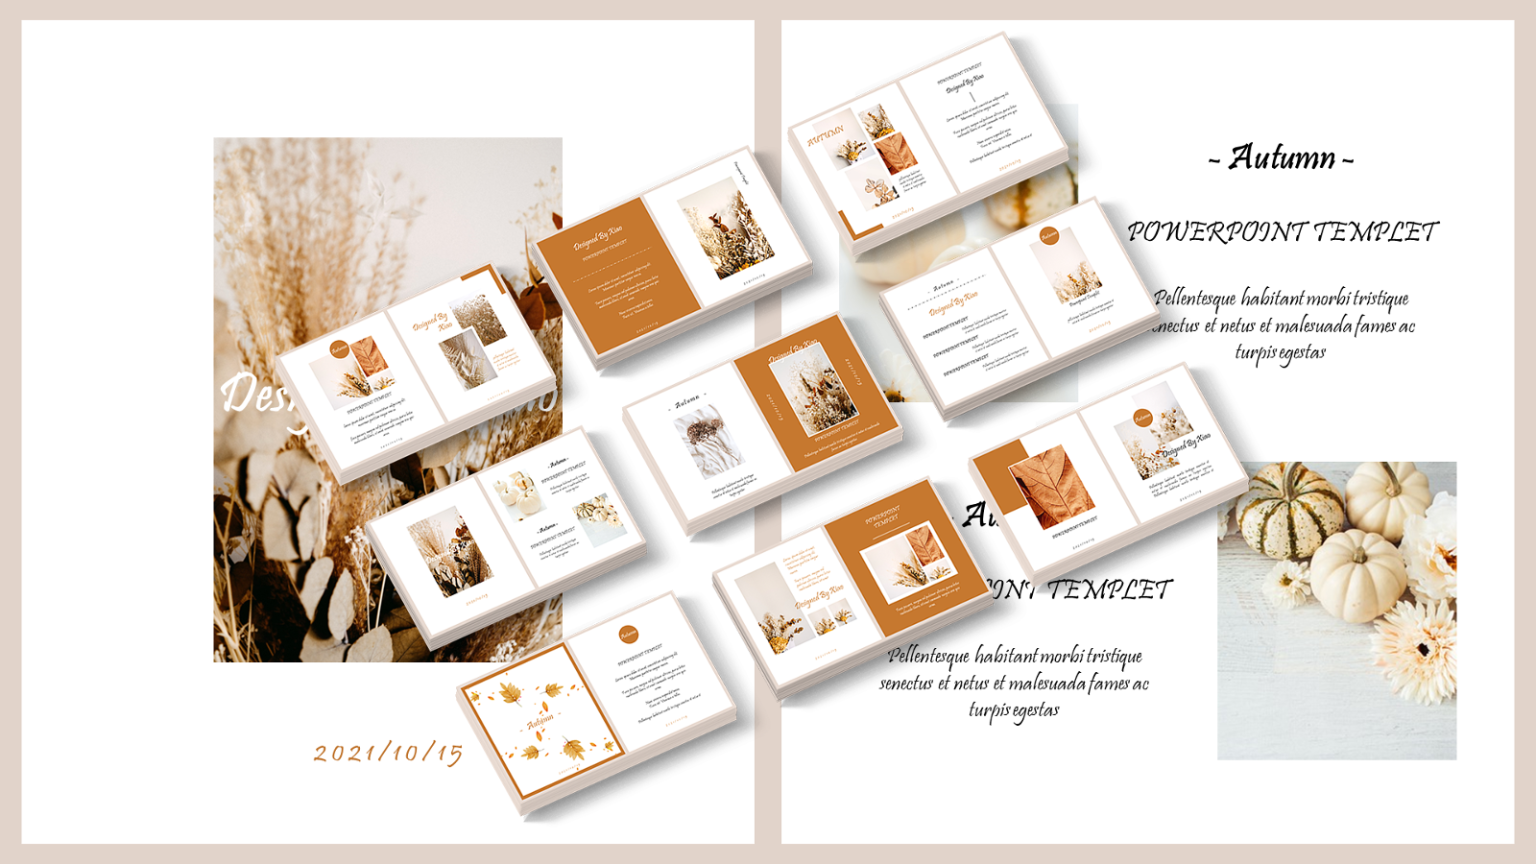 bakery-powerpoint-template-free-download-15-pages-just-free-slide